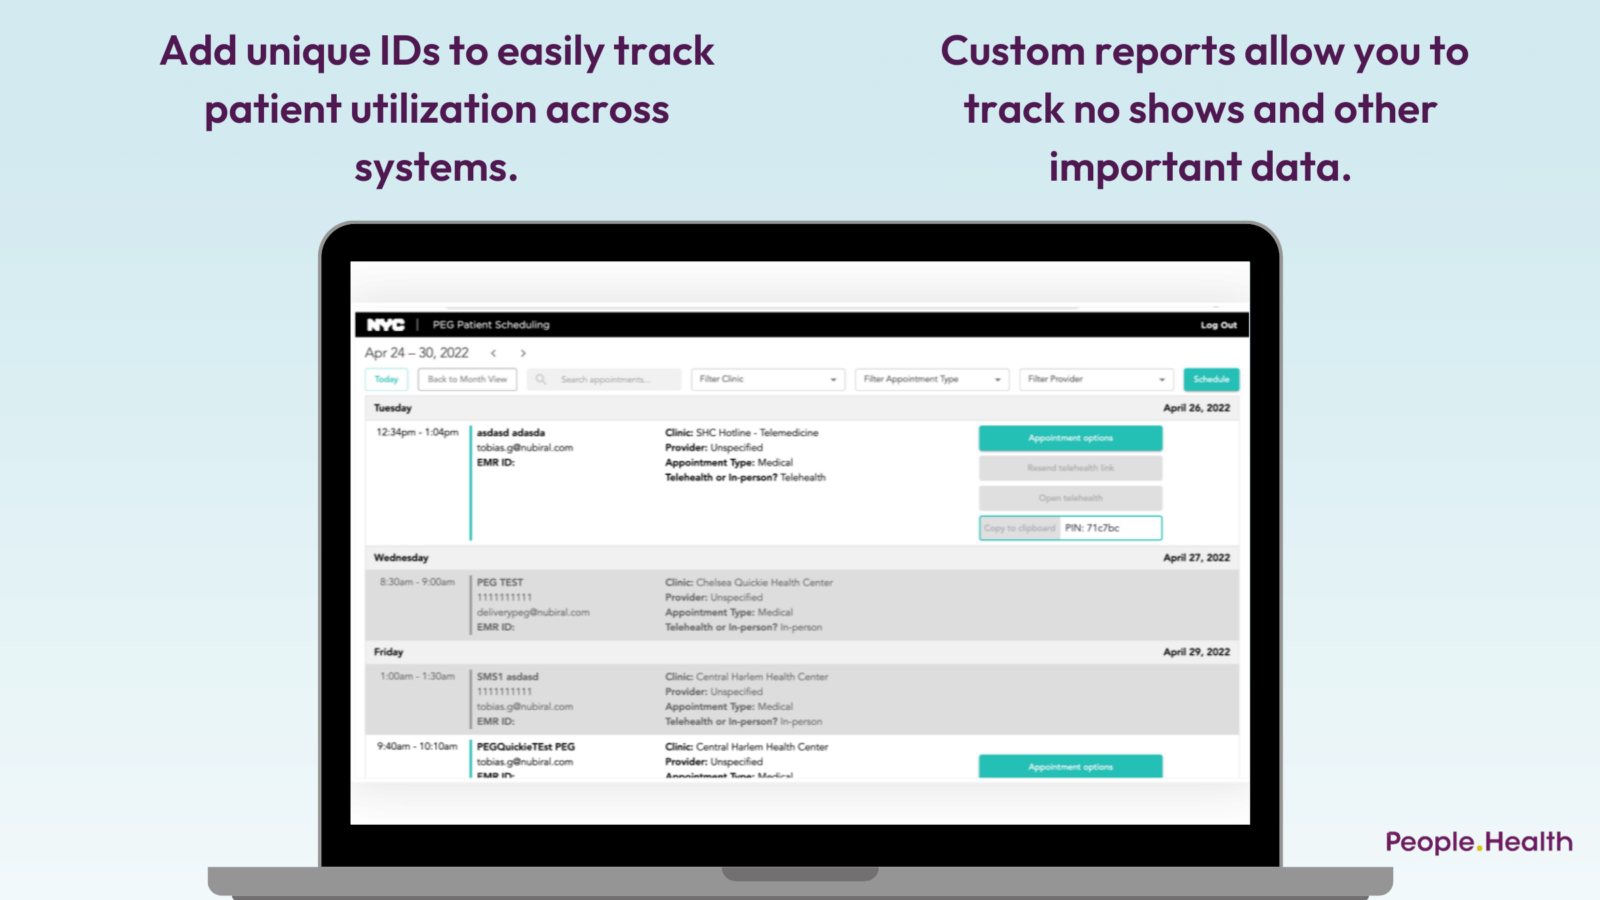 Add unique IDs to easily track patient utilization across systems.